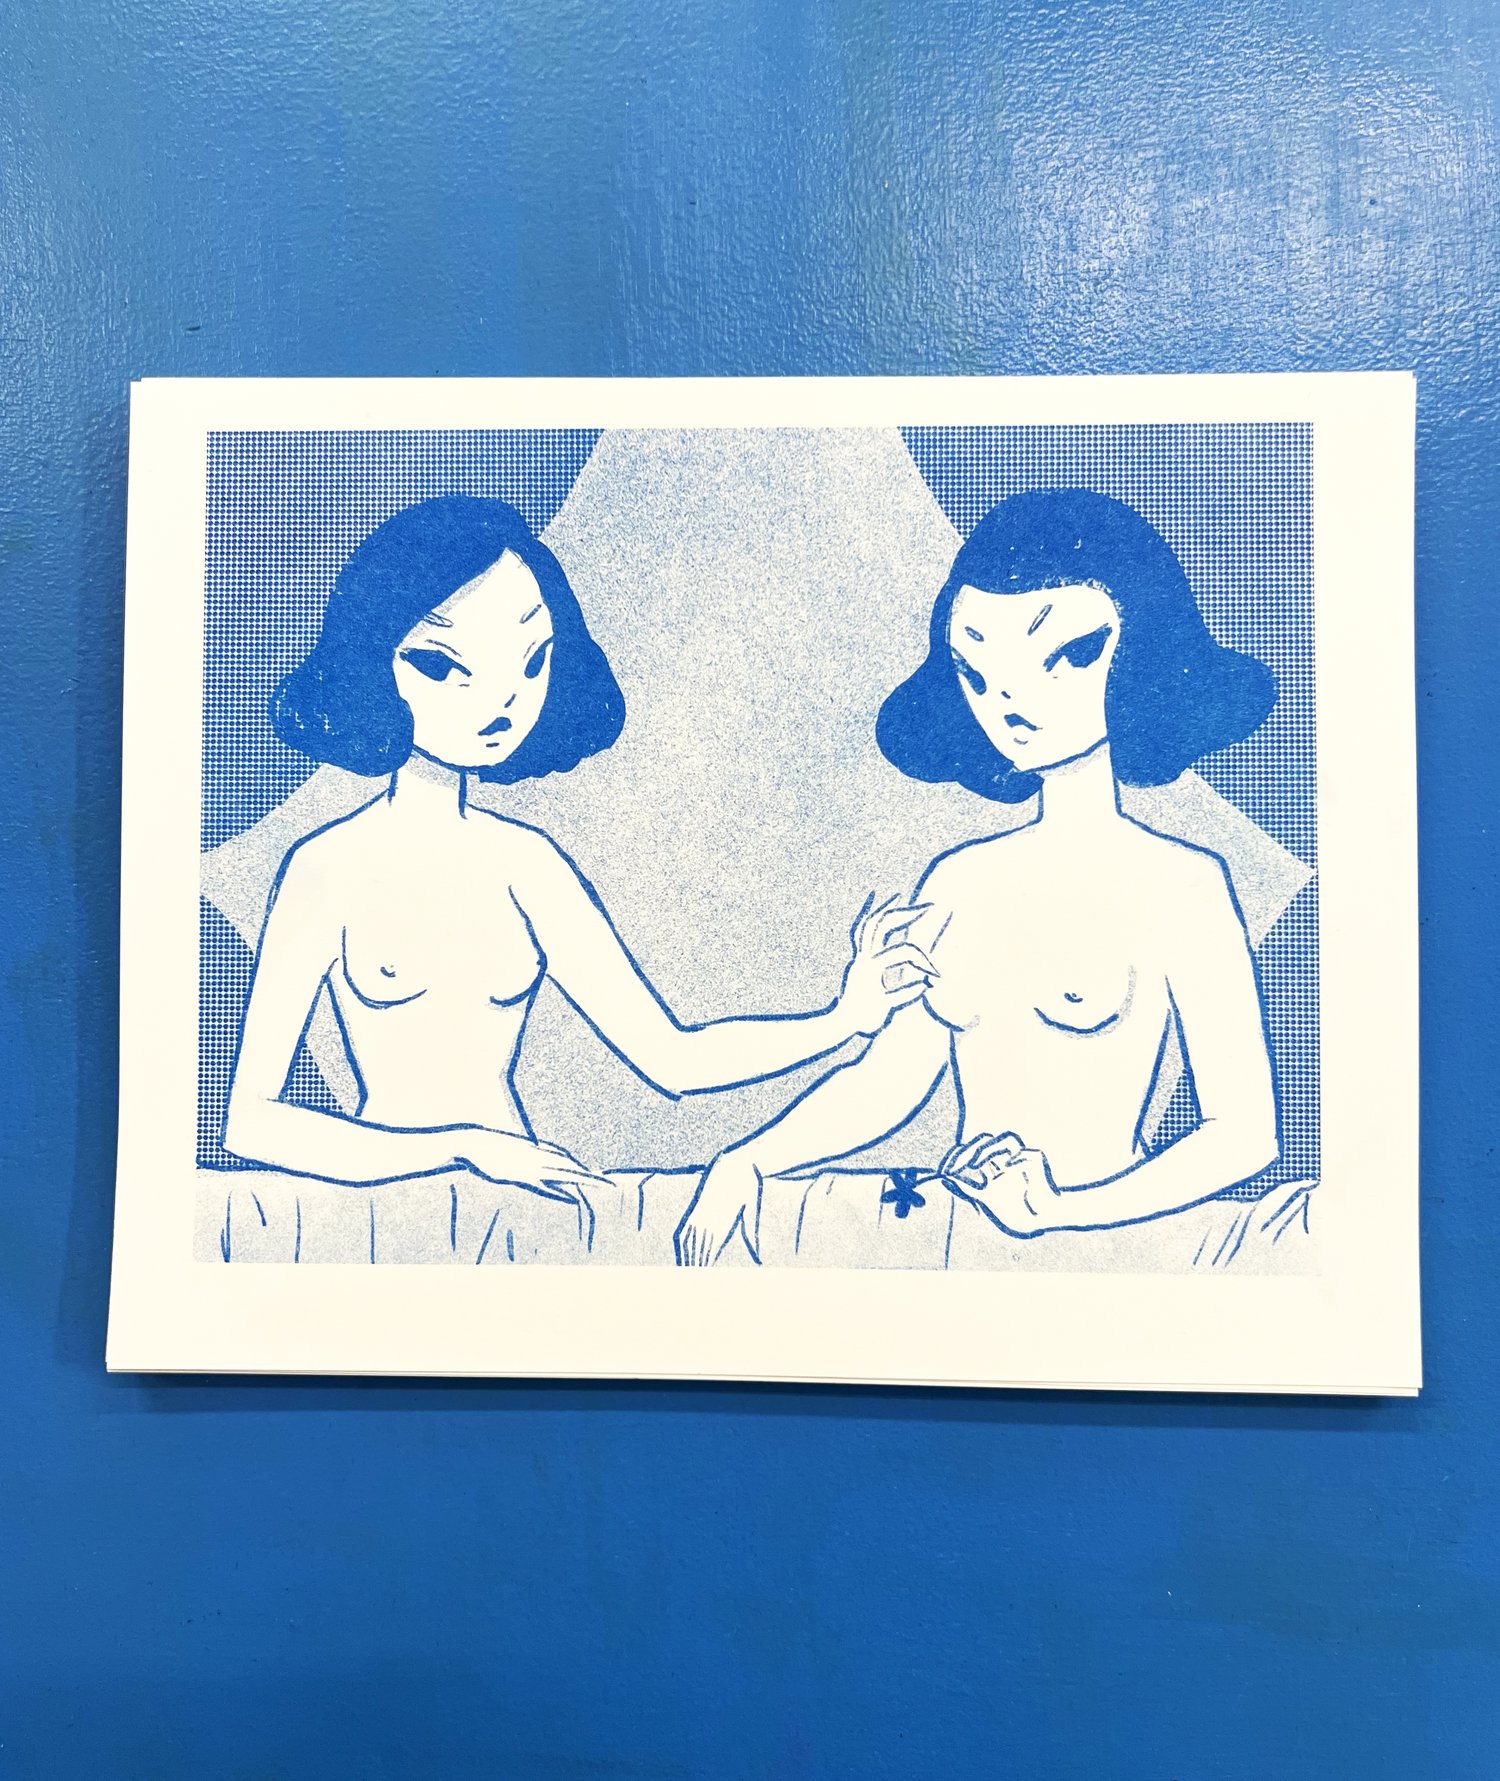 gabrielle and one of her sisters - riso print